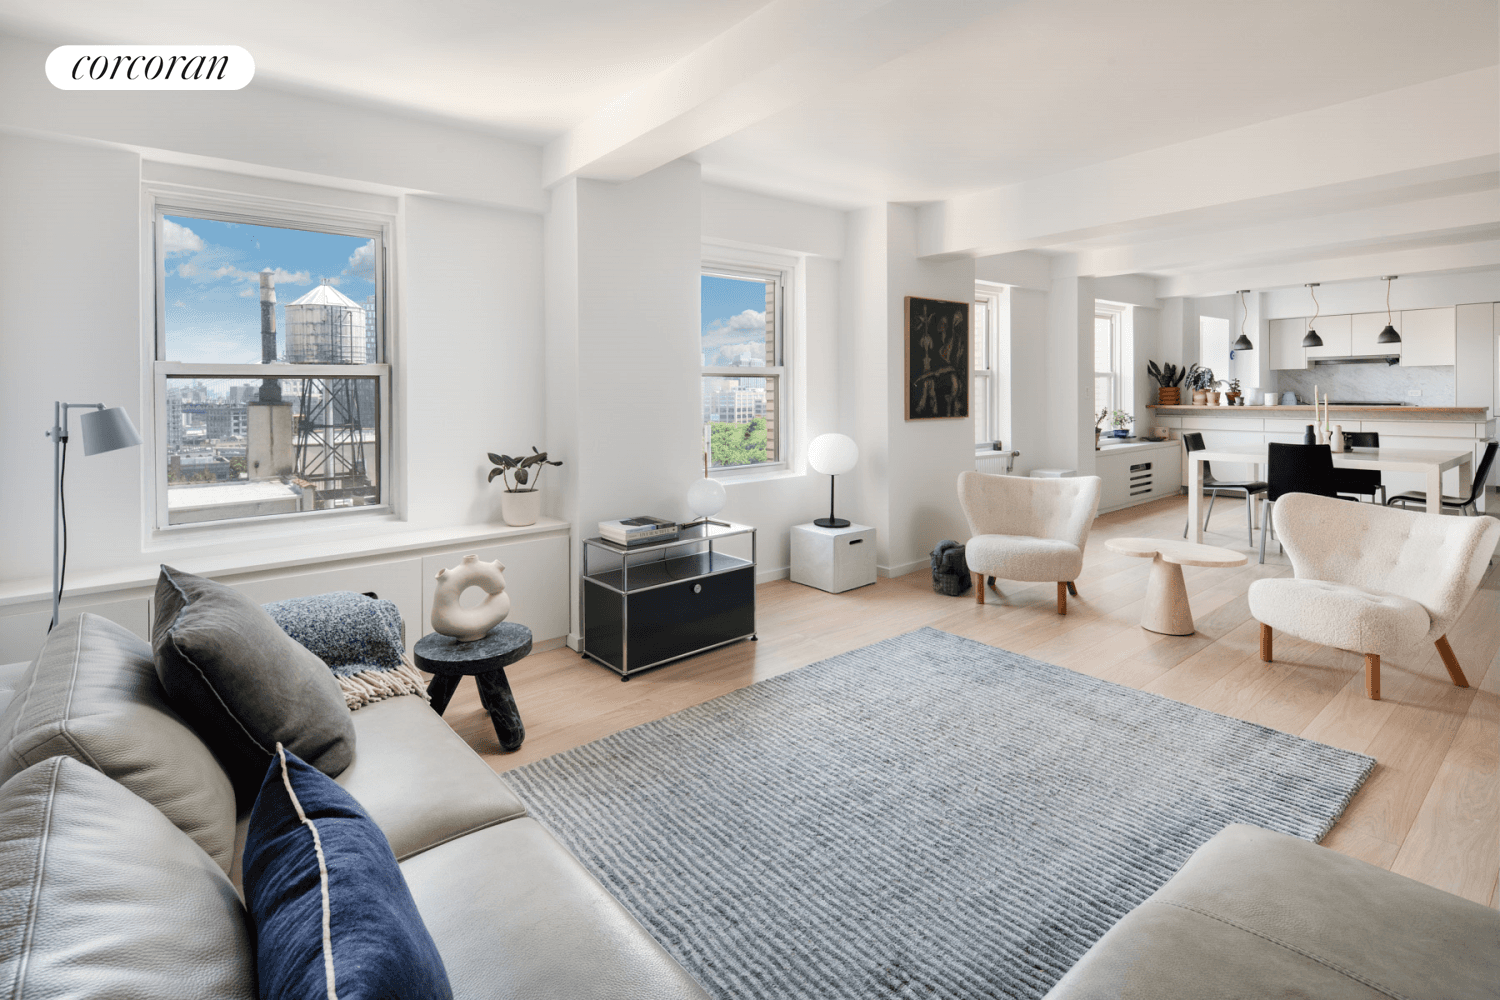 Breathtaking panoramic views of the Manhattan Skyline, Brooklyn Bridge and River from this magnificent 3 bedroom very easily convertible to 4 bedrooms home nestled within the historic St.